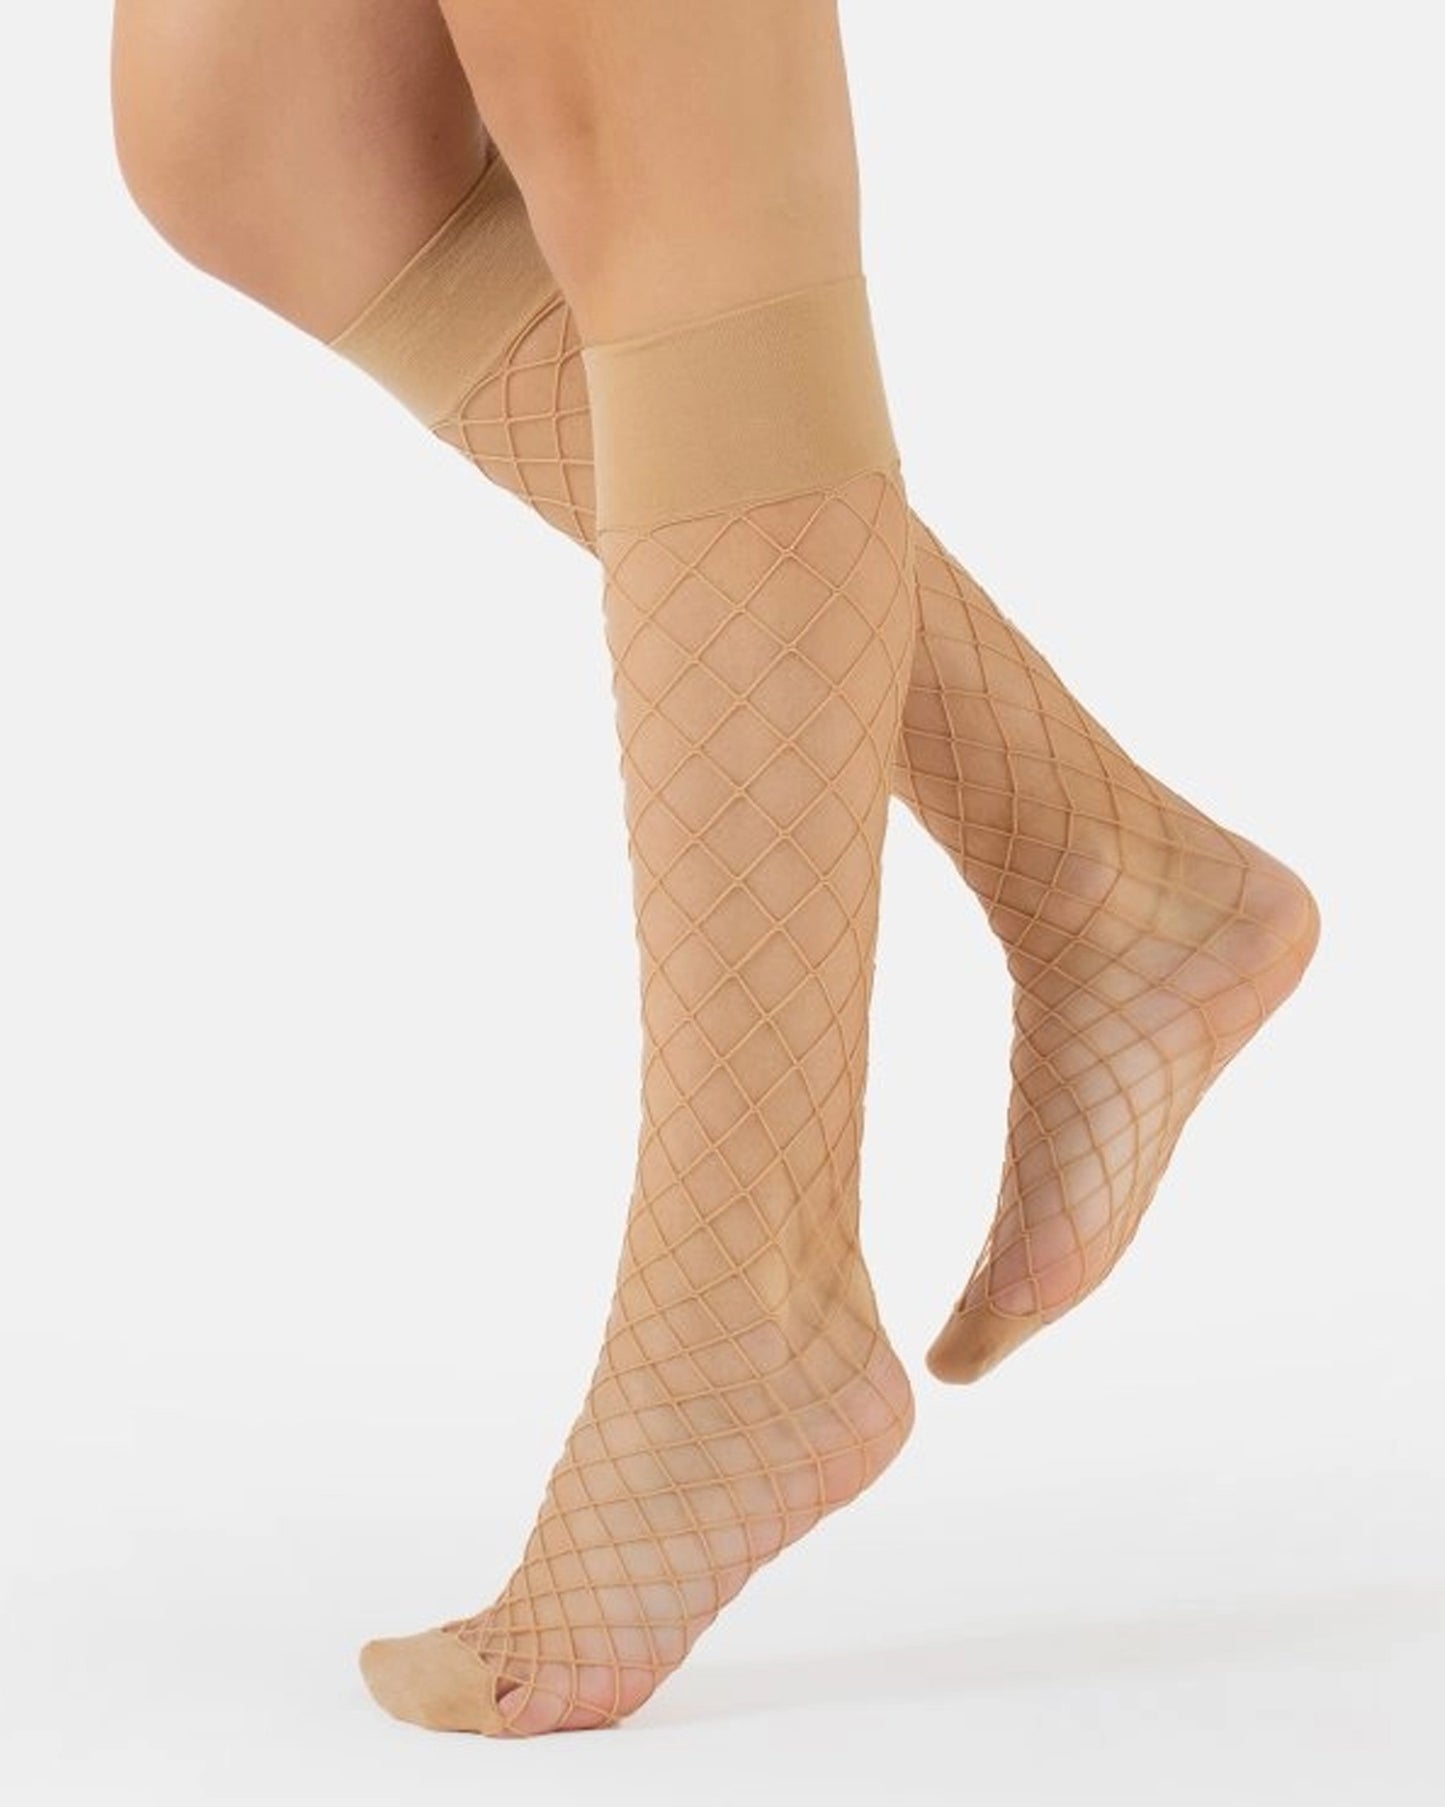 Calzitaly - Fence Fishnet Knee-Highs 2 Pk - Nude wide fence fishnet knee-high socks with a plain opaque toe and deep elasticated cuff. 2 pairs per pack.